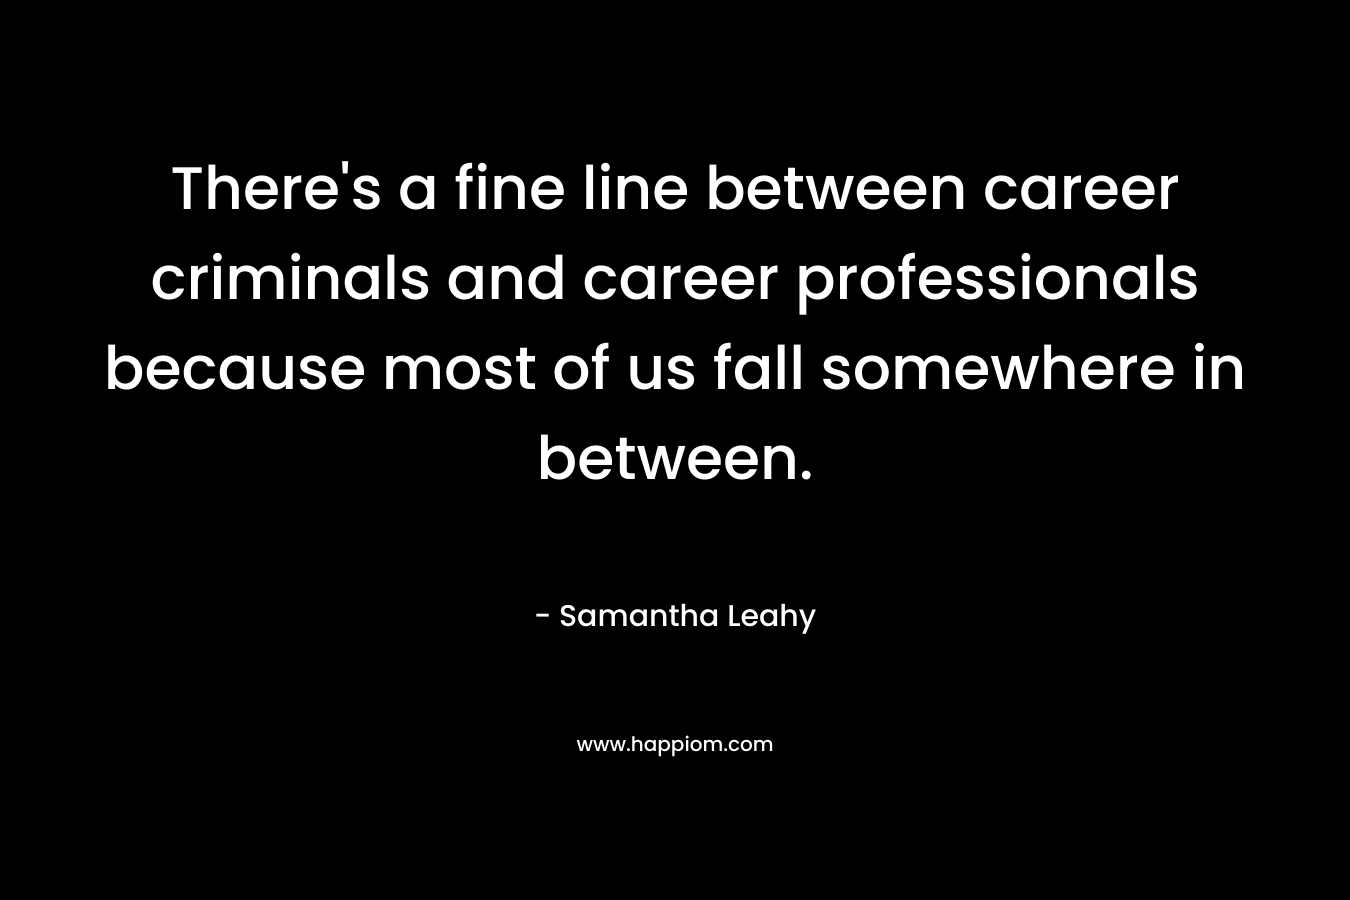 There's a fine line between career criminals and career professionals because most of us fall somewhere in between.